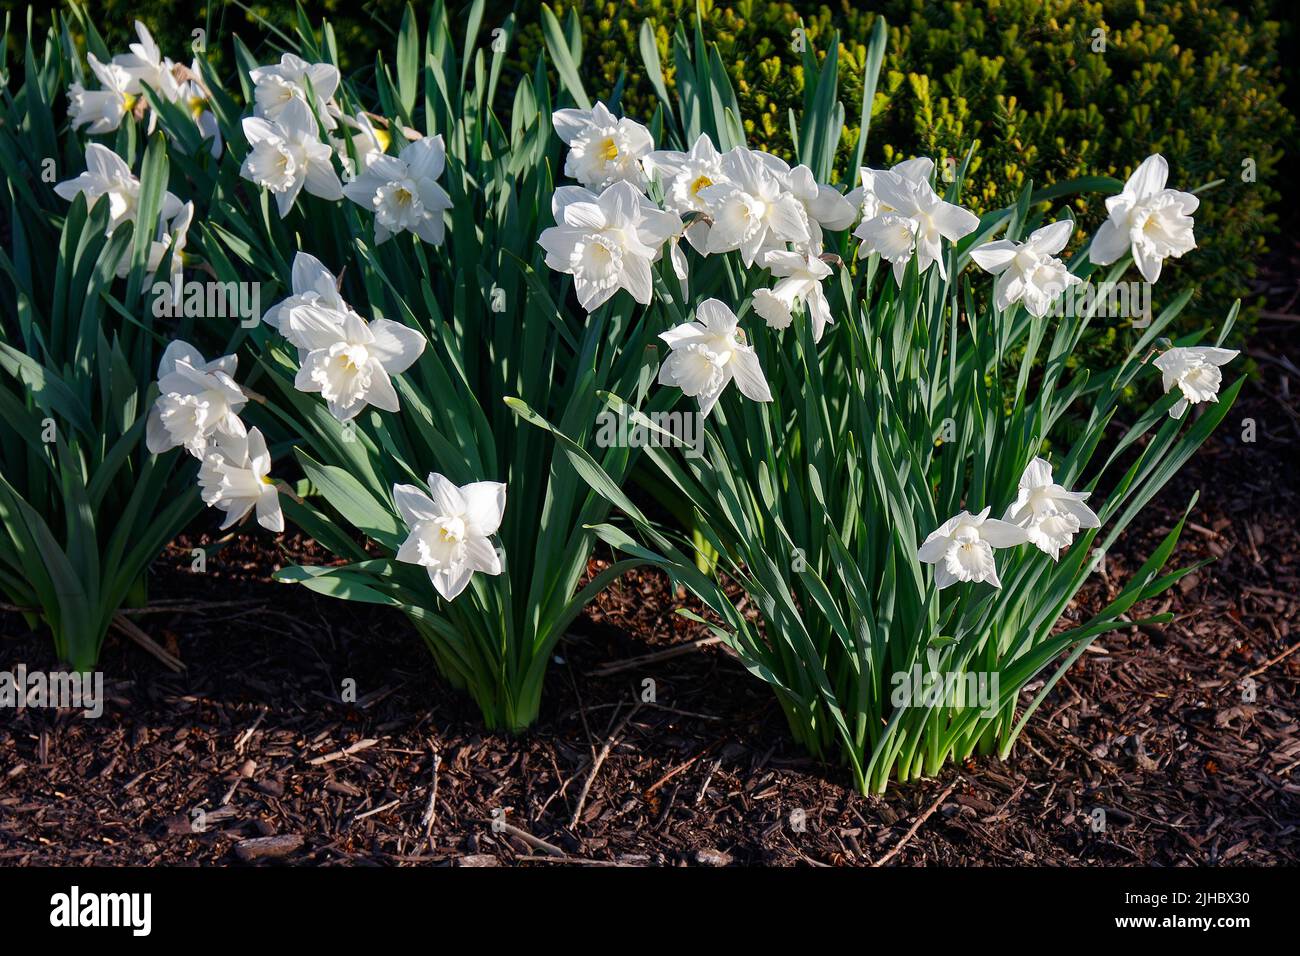 daffodils, white, yellow centers, bed, spring flowers, nature, bulbs, green leaves, garden, PA; Pennsylvania Stock Photo